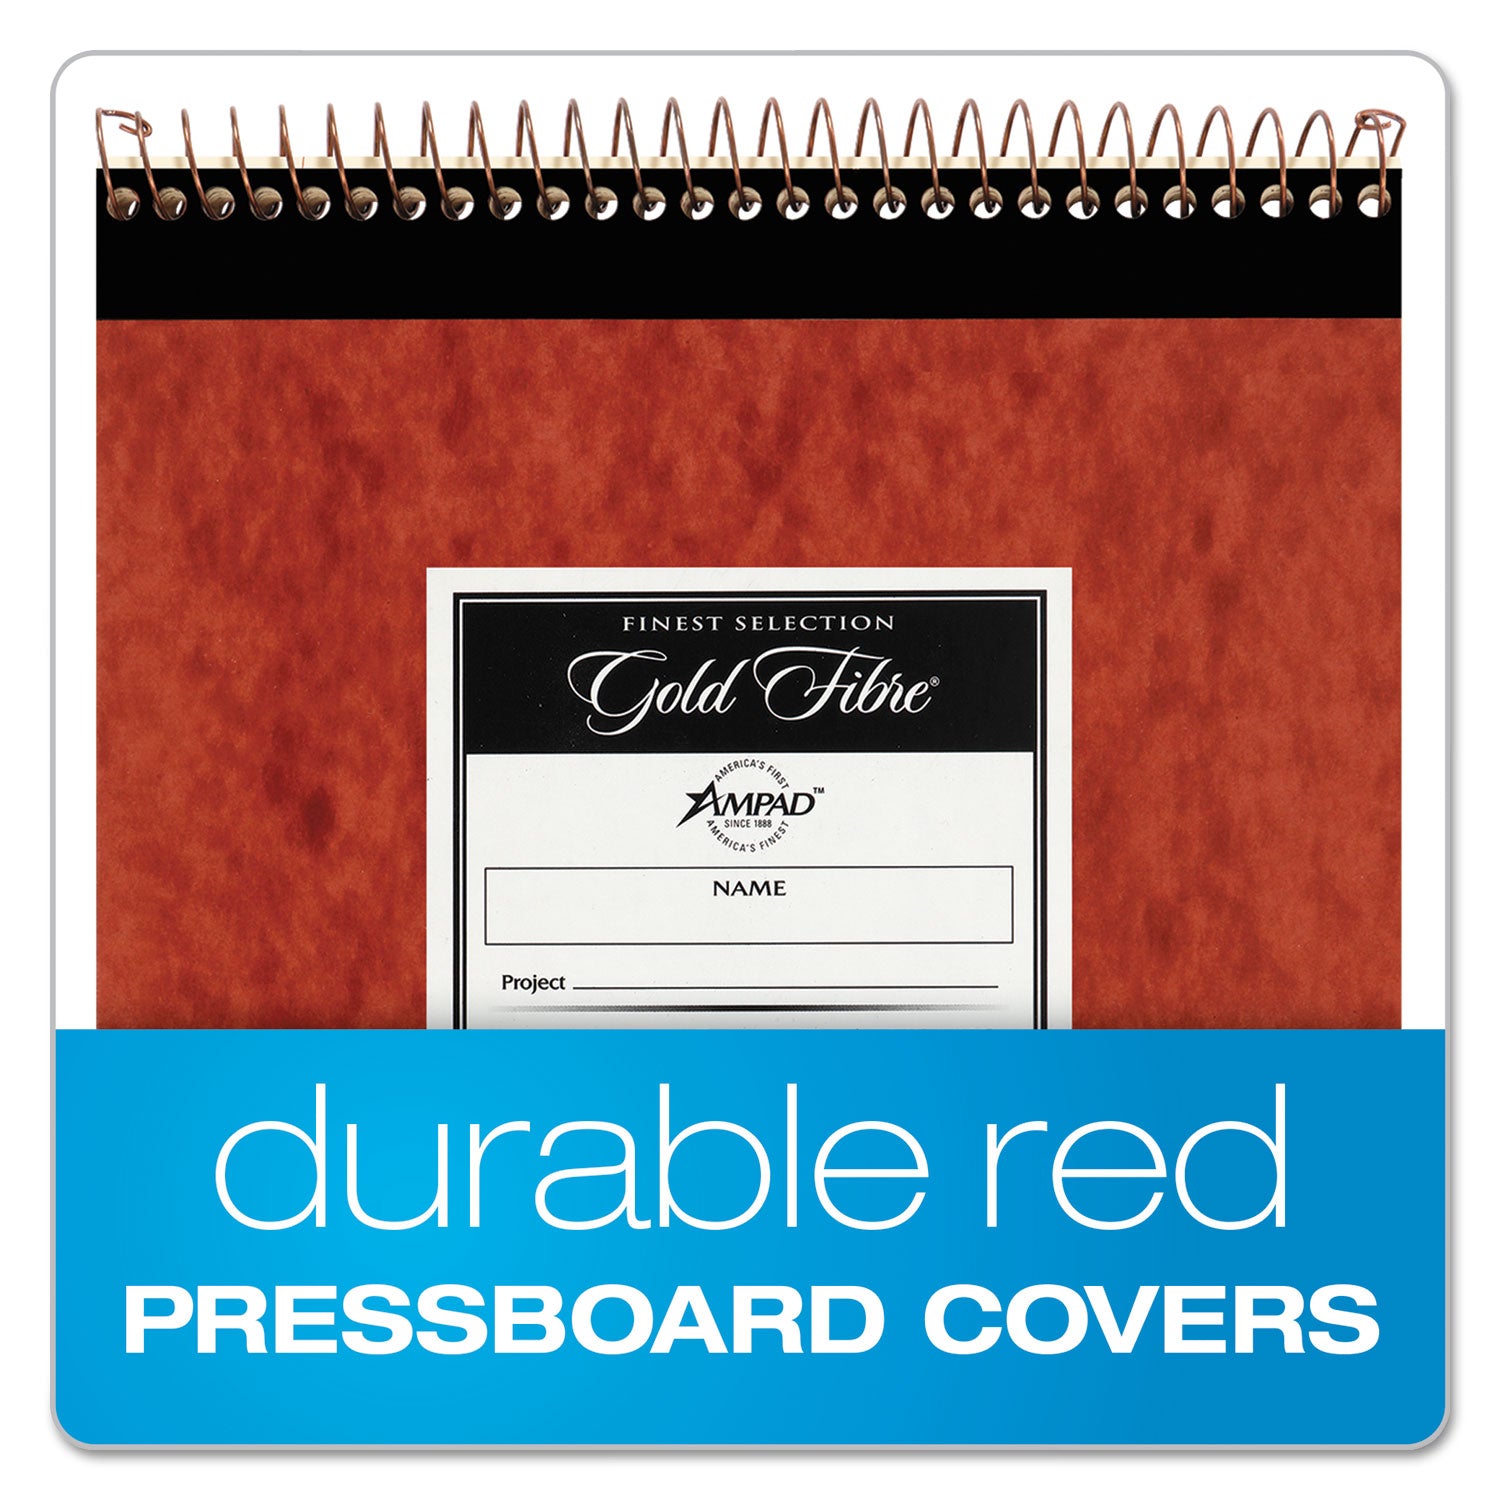 Gold Fibre Retro Wirebound Writing Pads, Wide/Legal and Quadrille Rule, Red Cover, 70 White 8.5 x 11.75 Sheets - 